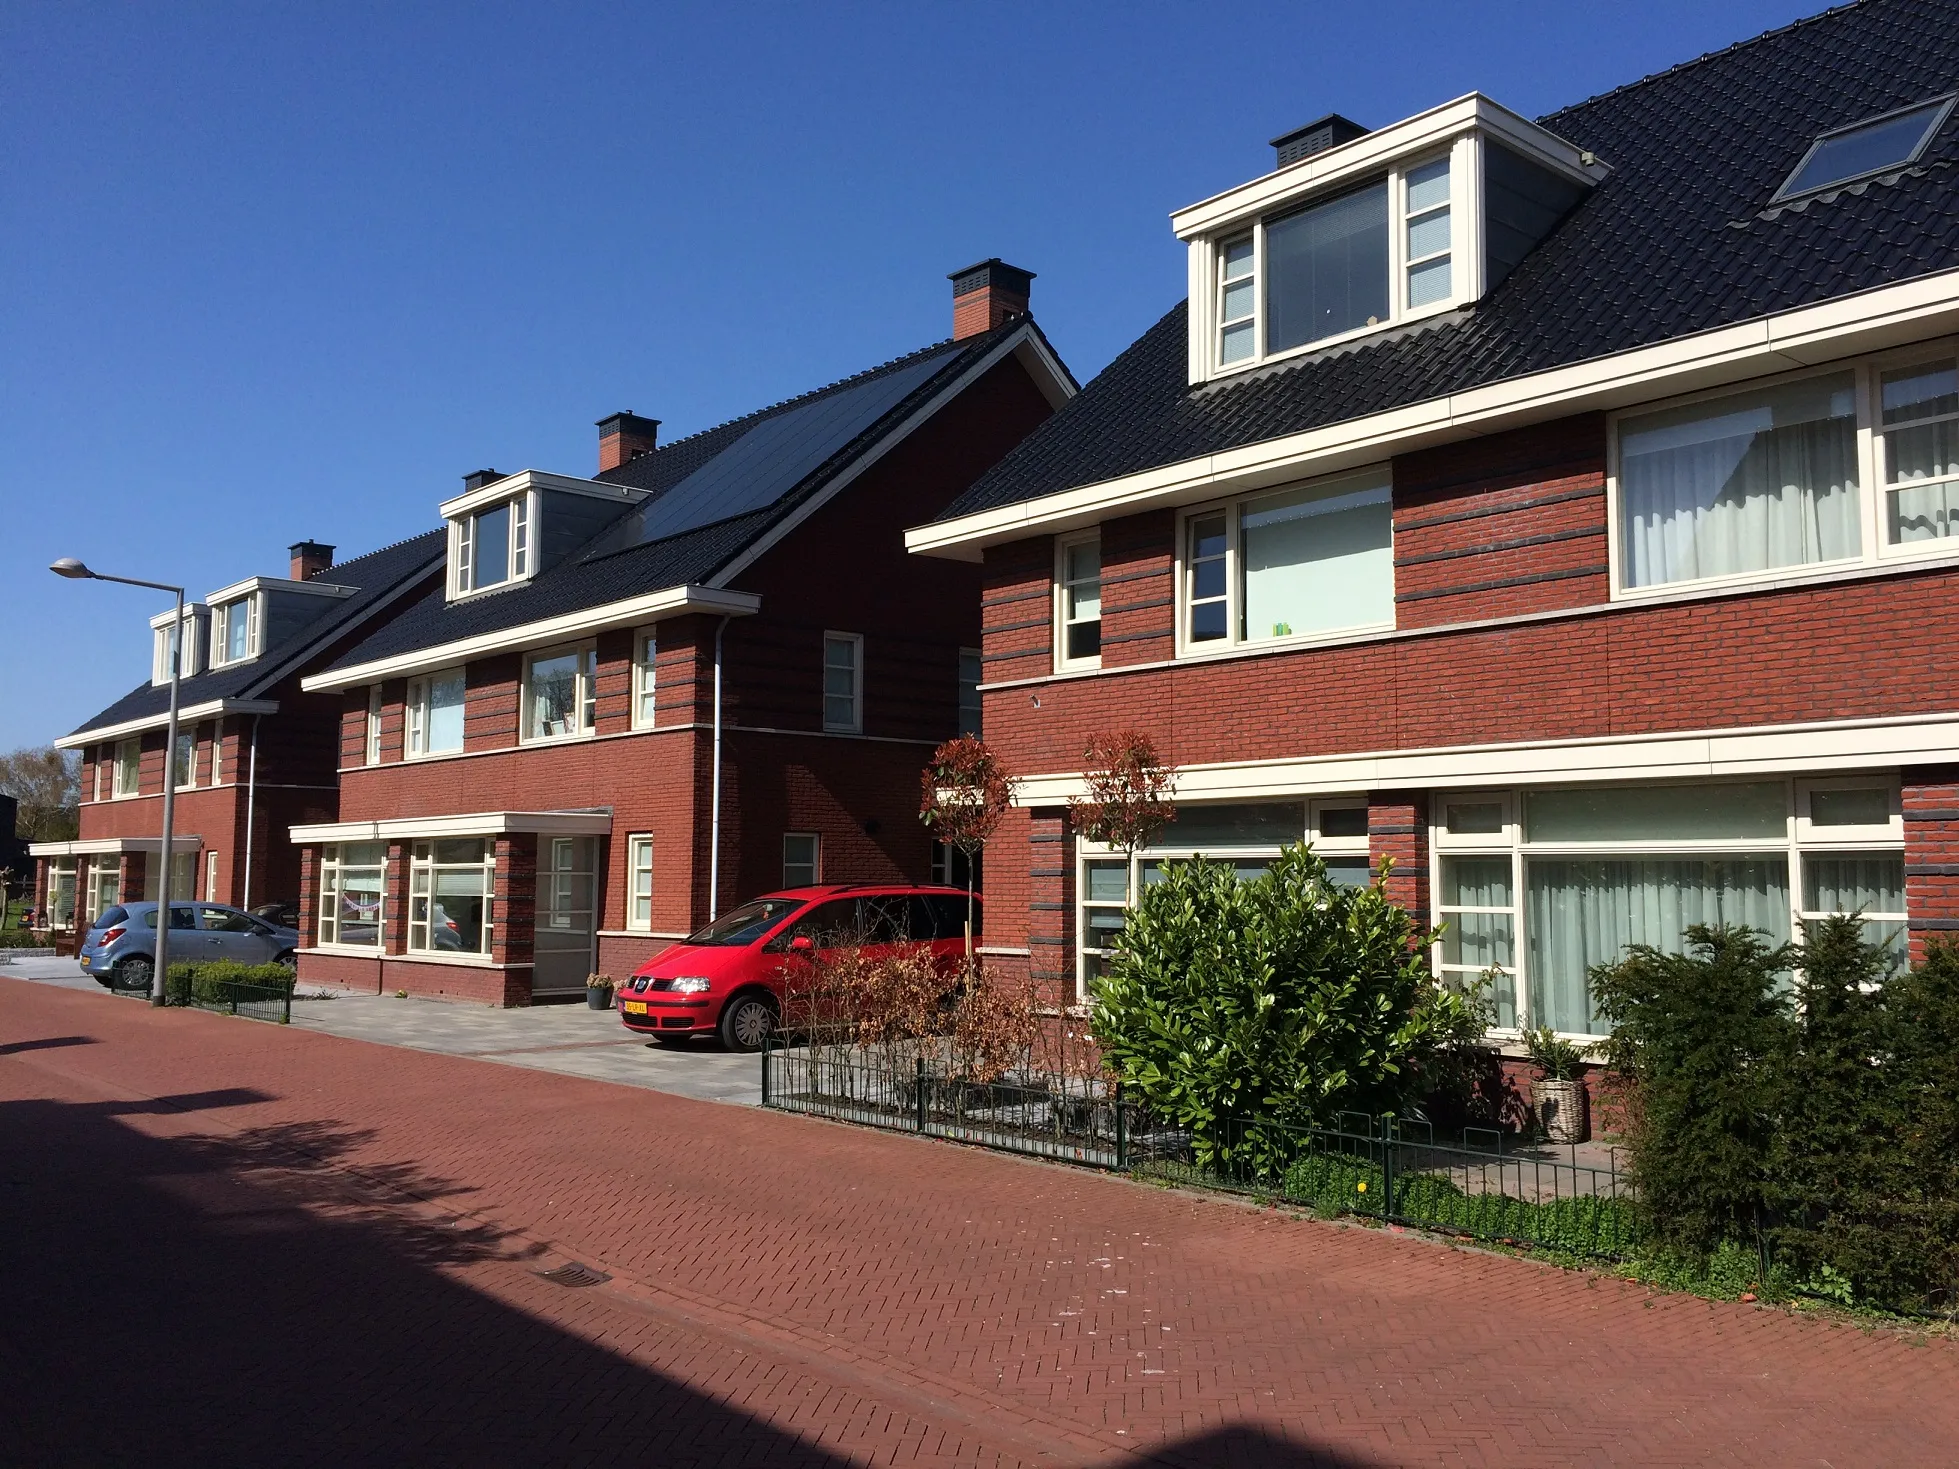 Photo showing: Houses on the Woudmeerstraat ("Wood Lake Street") in The Hague, Netherlands.